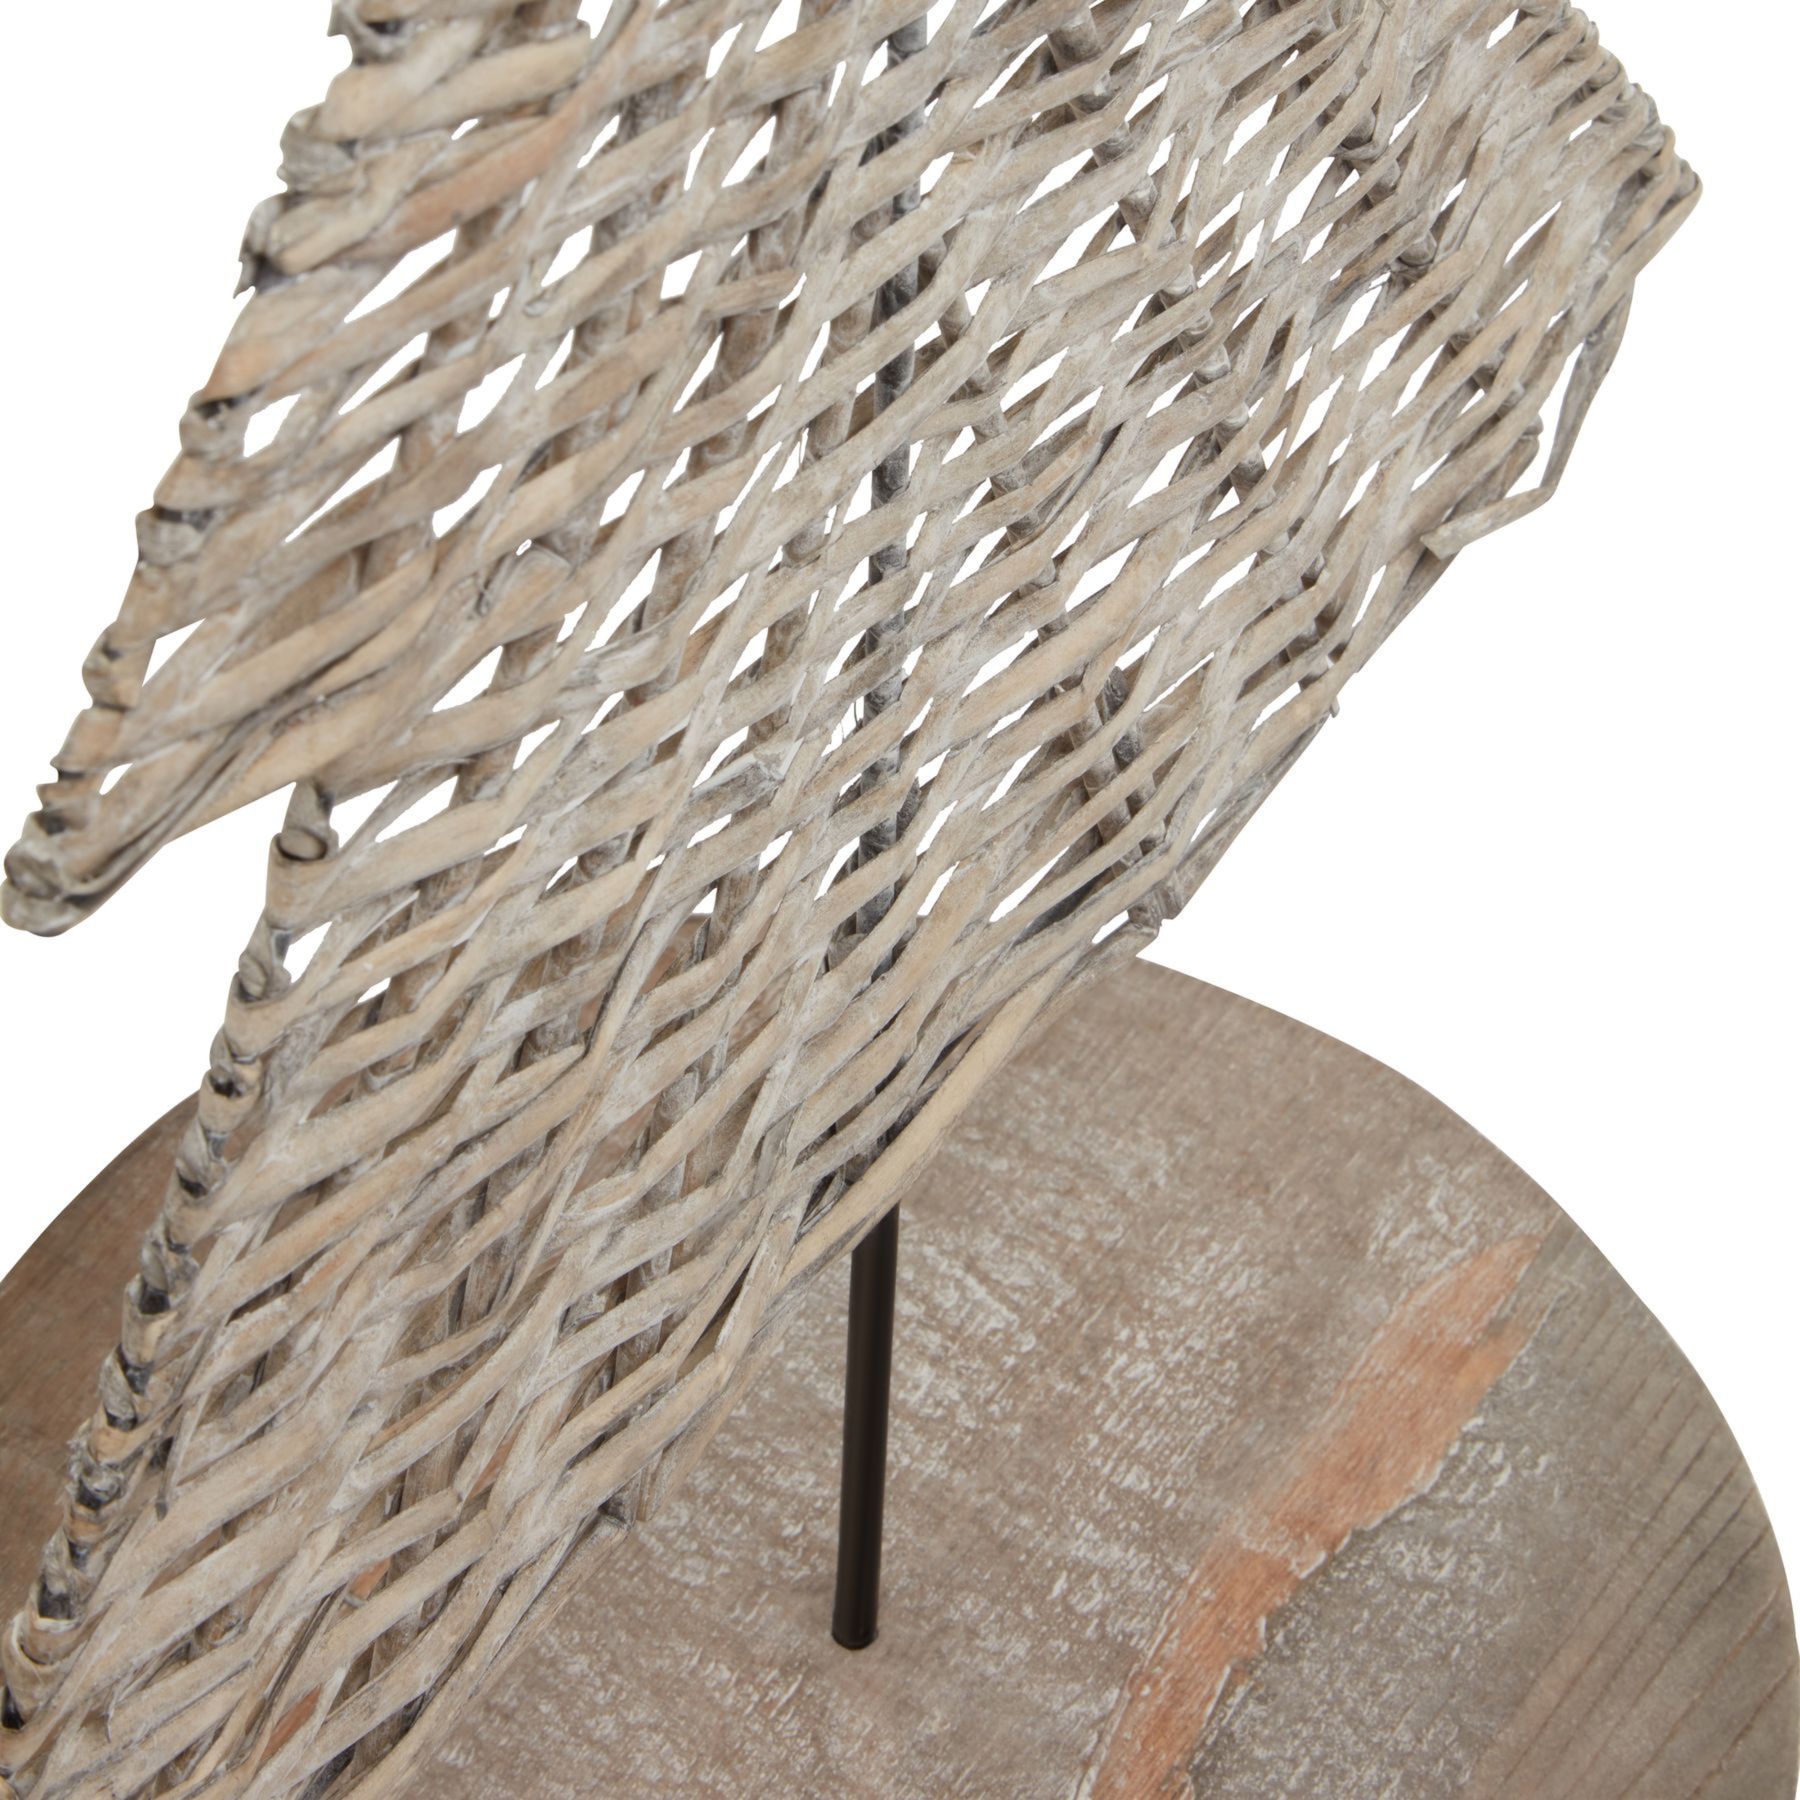 The Noel Collection Wicker Tree Ornament - Image 2